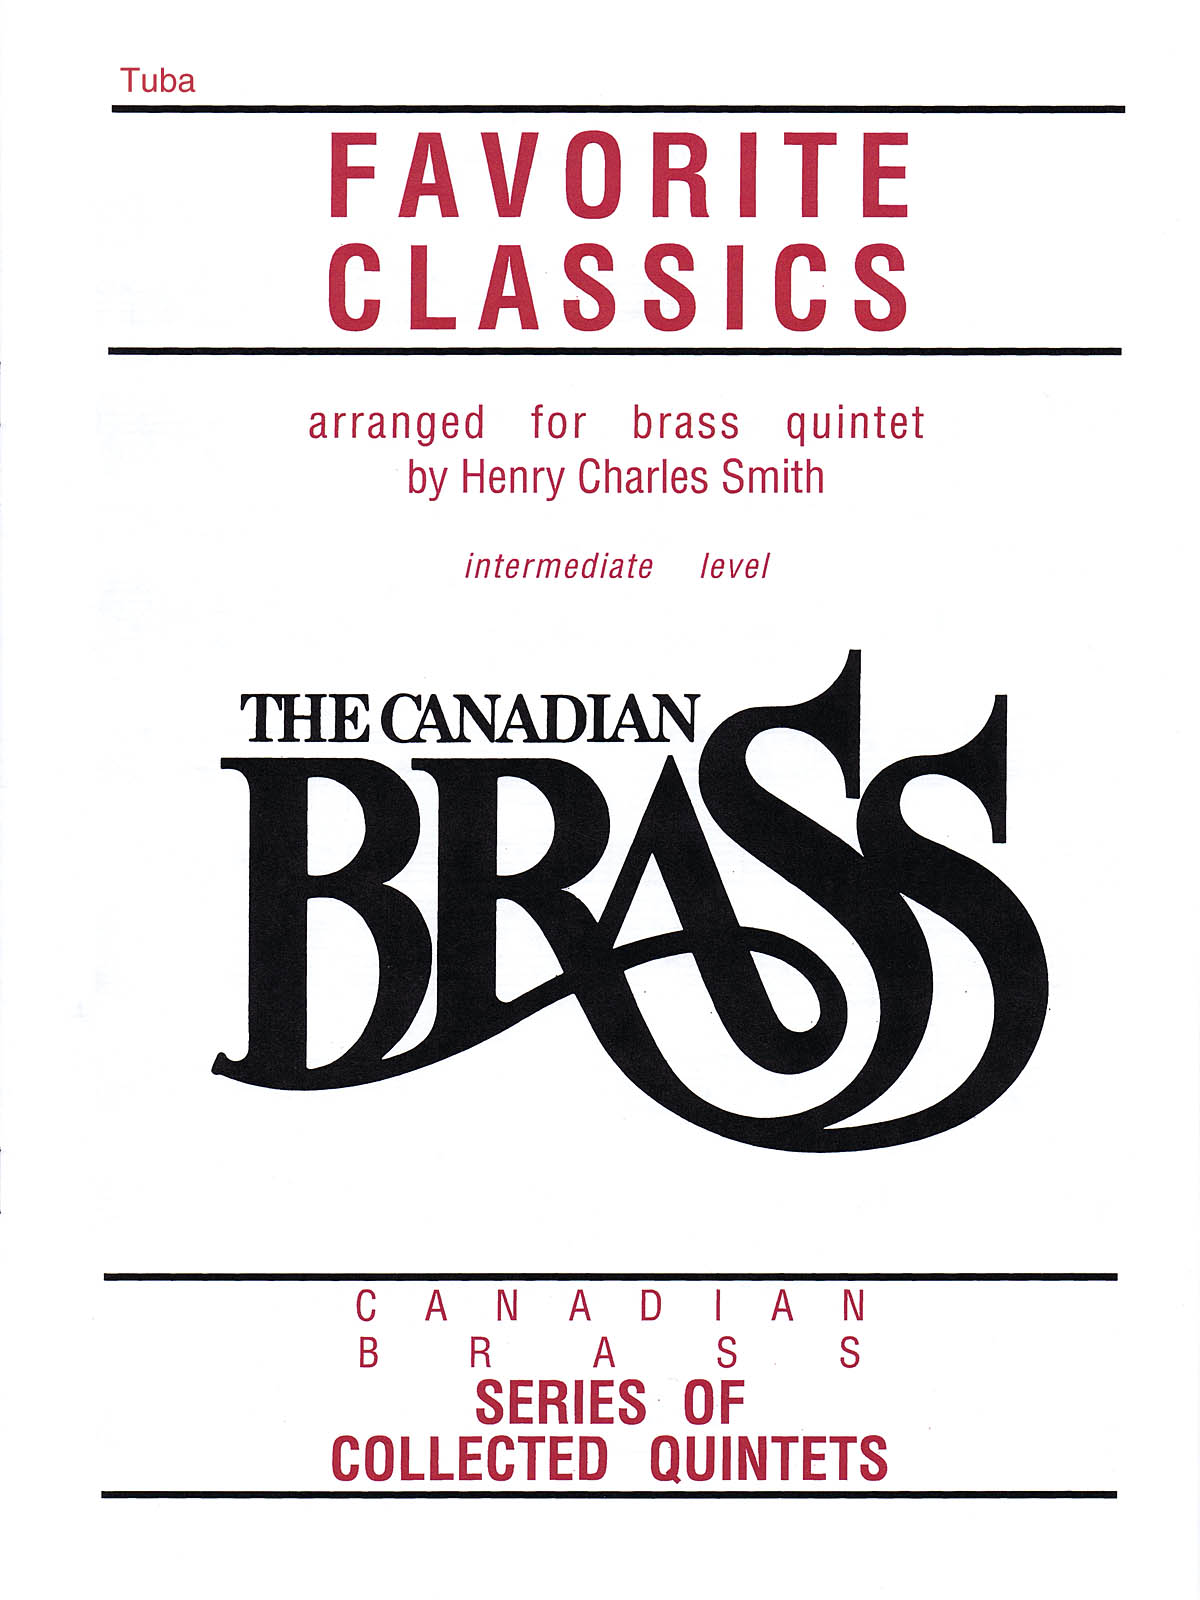 The Canadian Brass: Favorite Classics